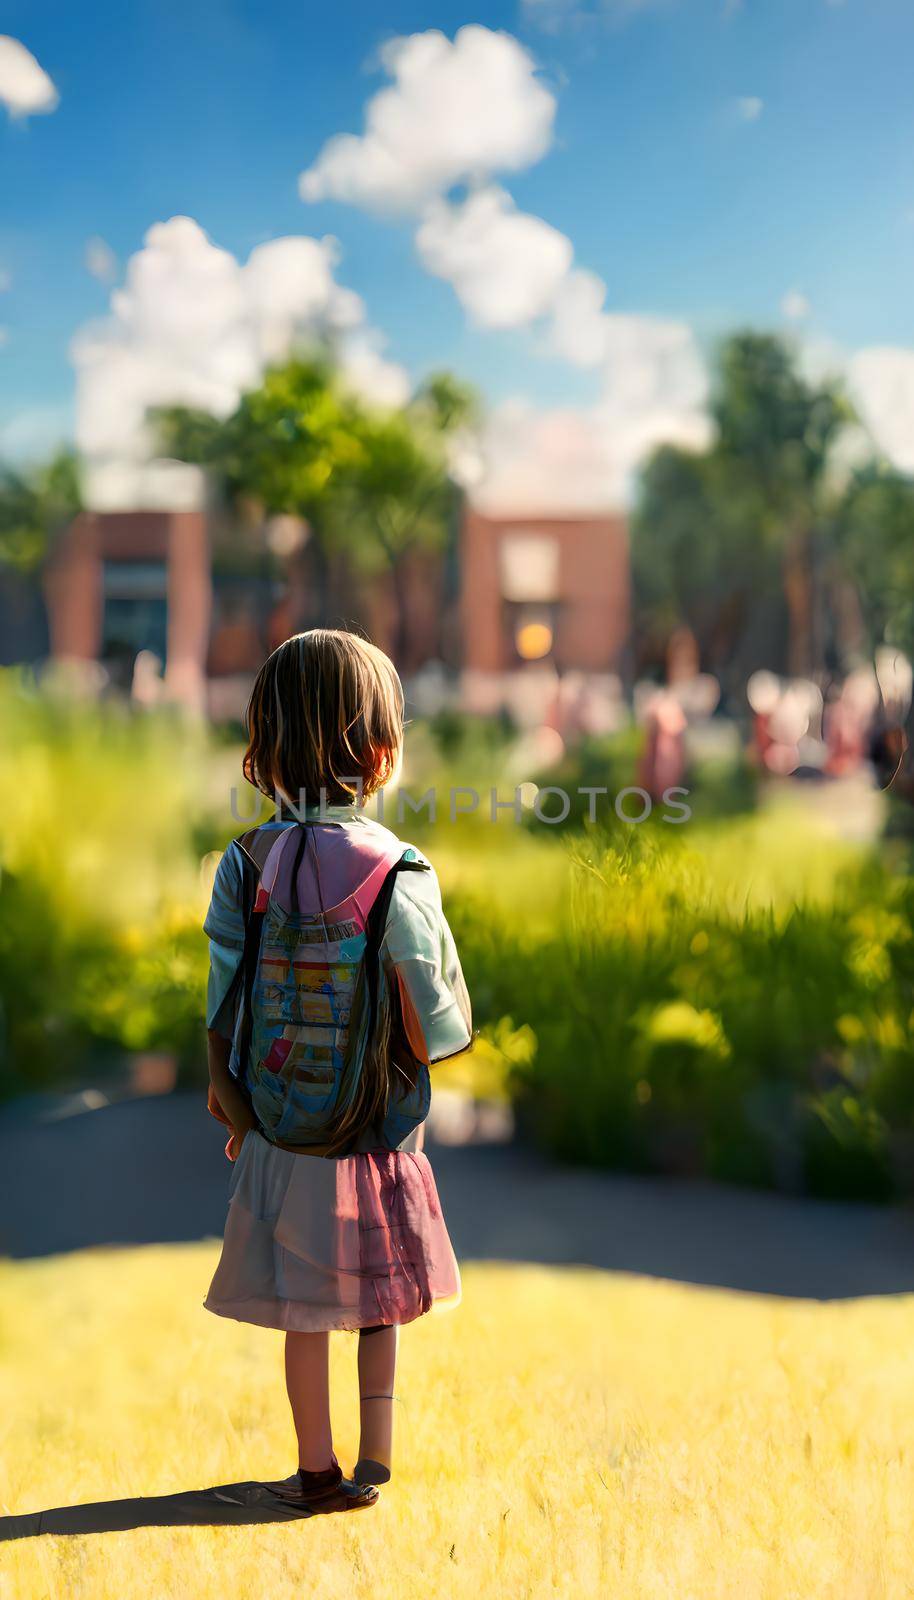 Back facing little girl with backpack looking at school building at sunny summer day, neural network generated art. Digitally generated image. Not based on any actual scene or pattern.